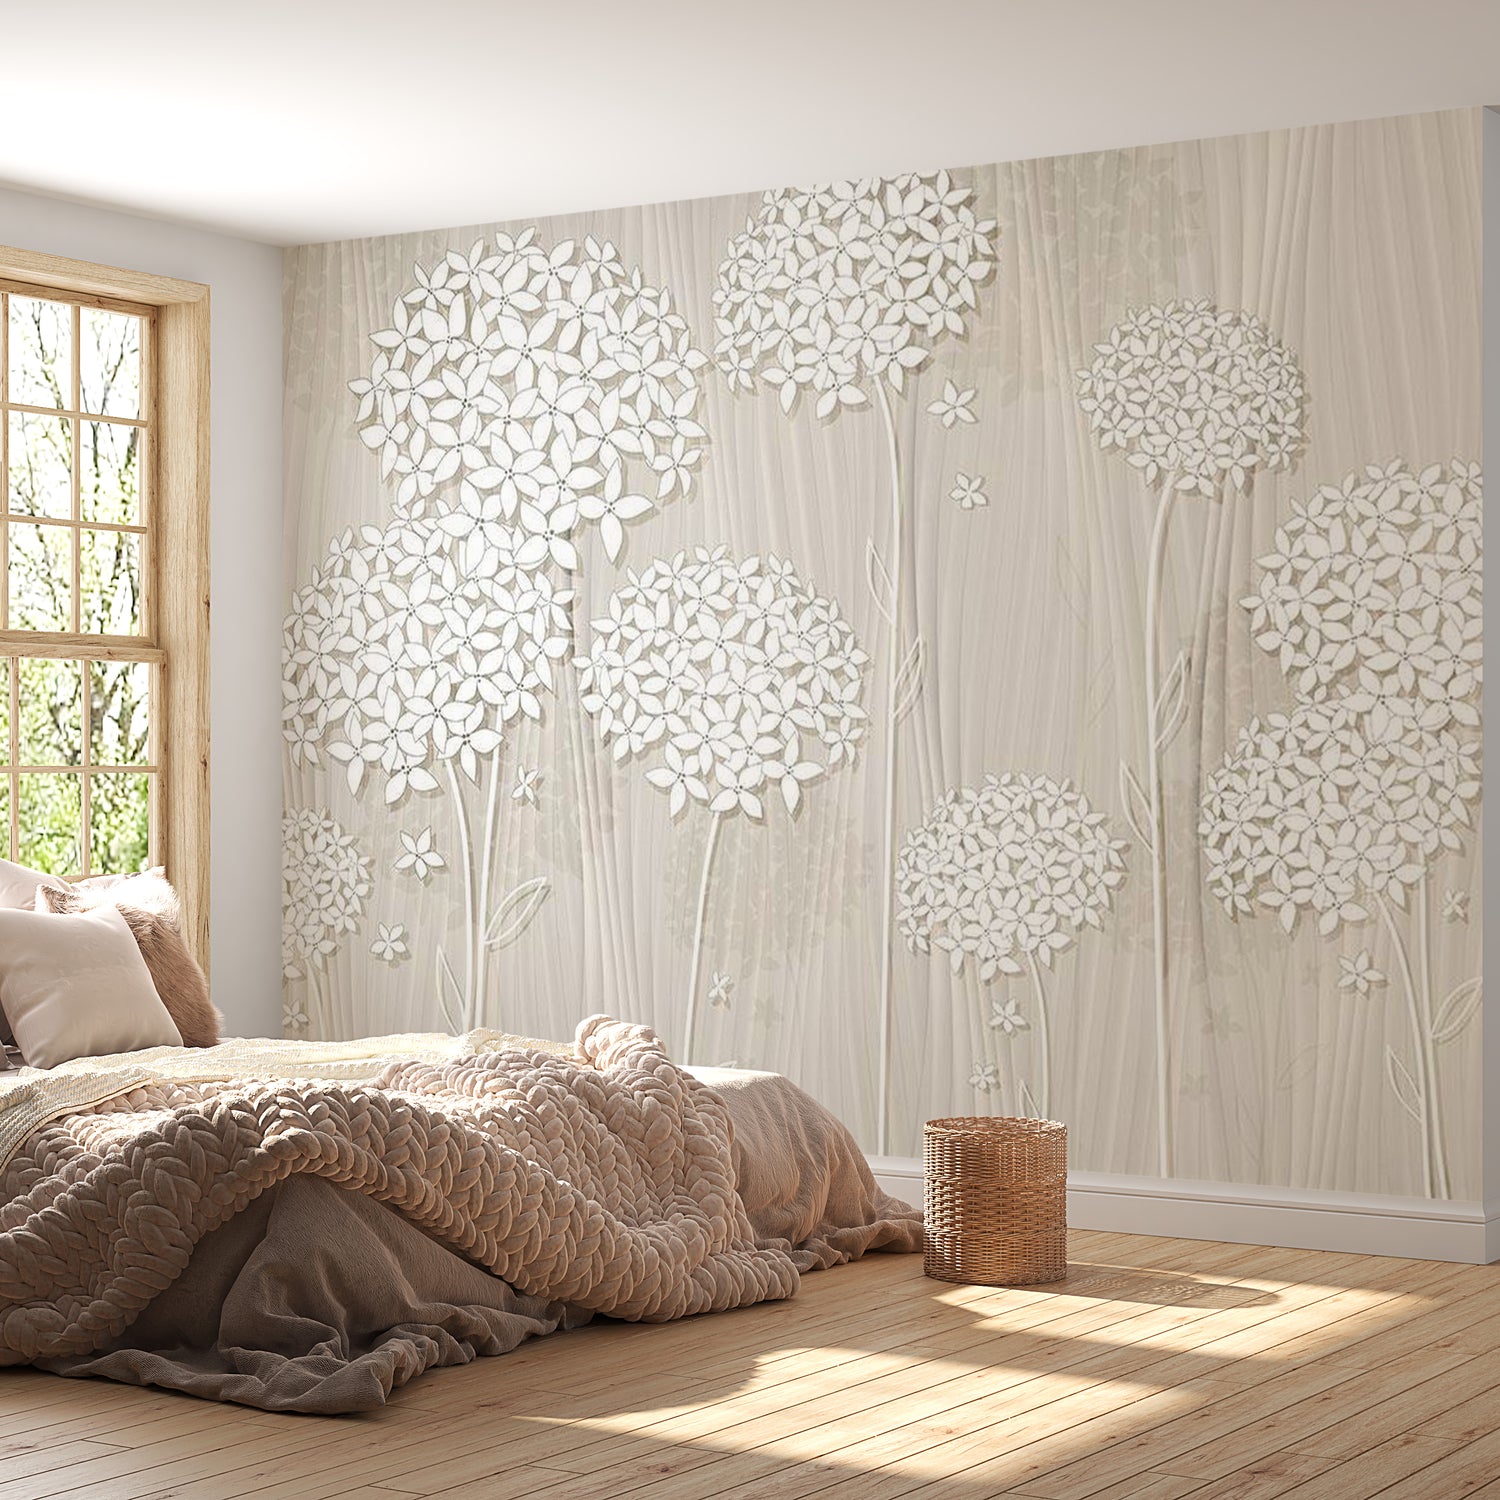 Peel & Stick Floral Wall Mural - Creamy Daintiness - Removable Wall Decals